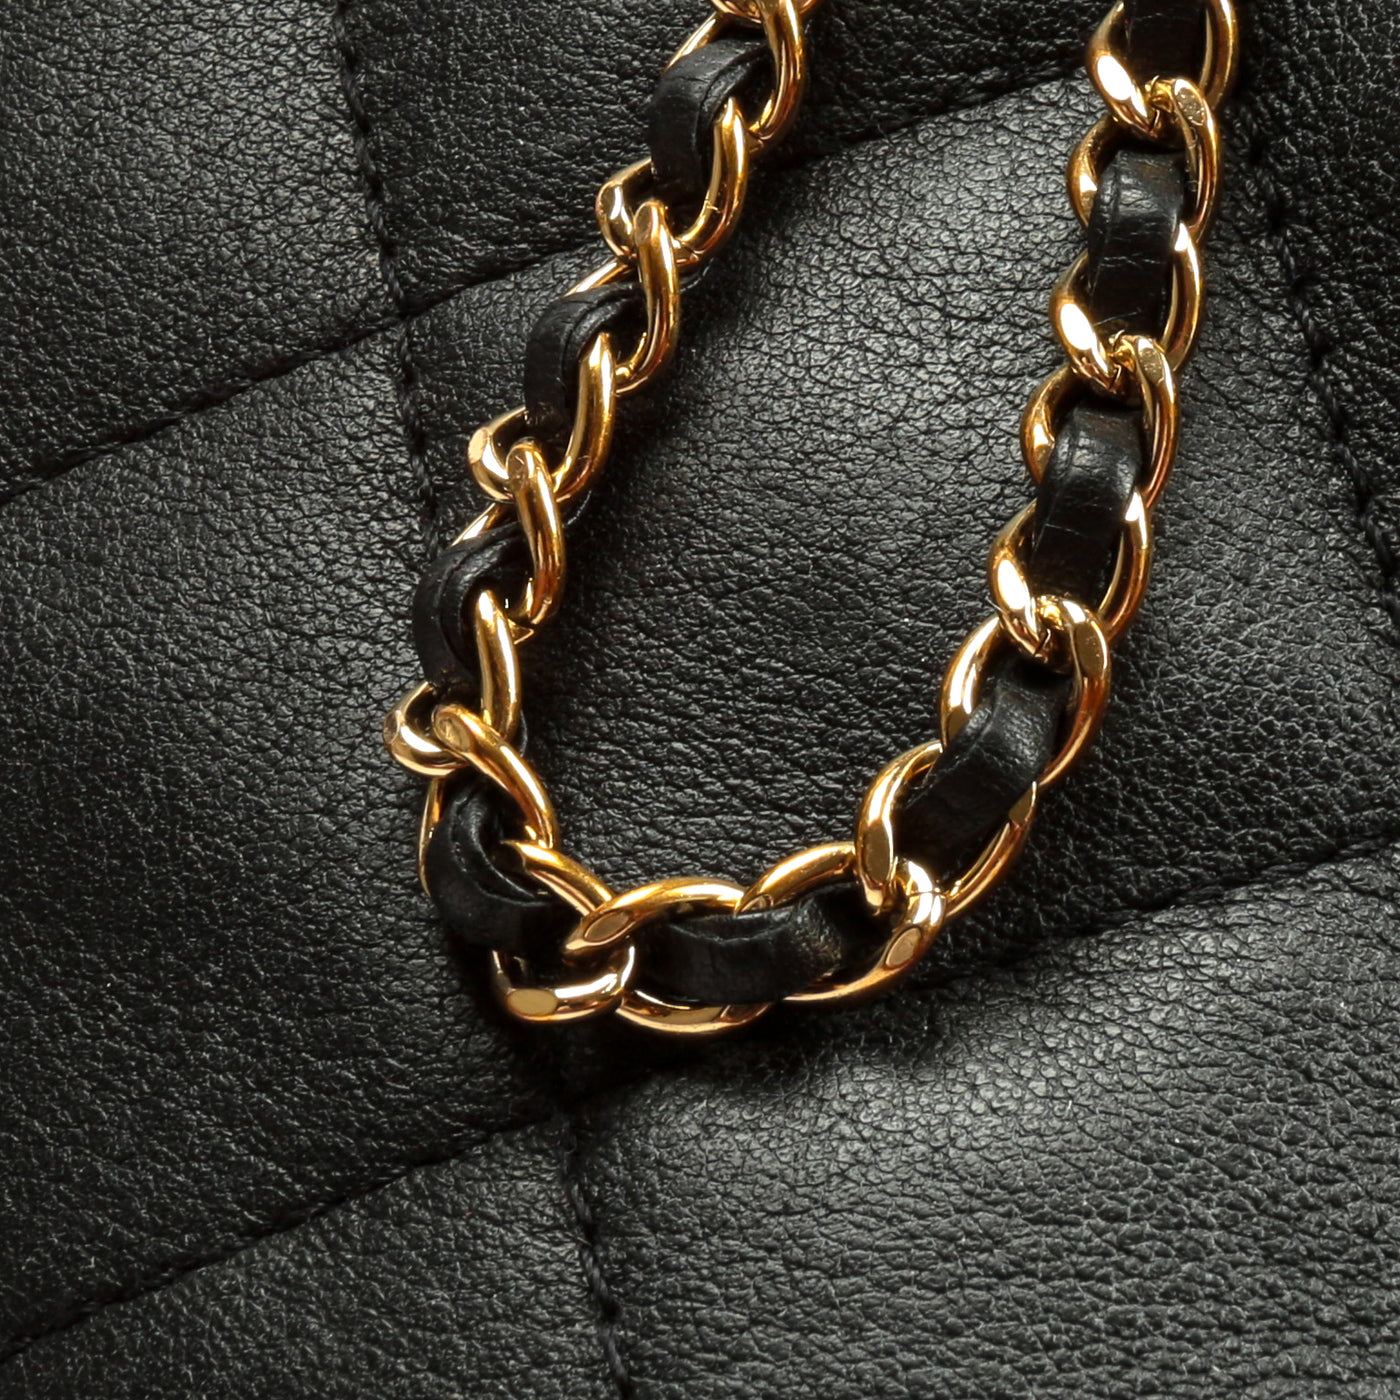 Chanel Quilted Chain Bucket Bag